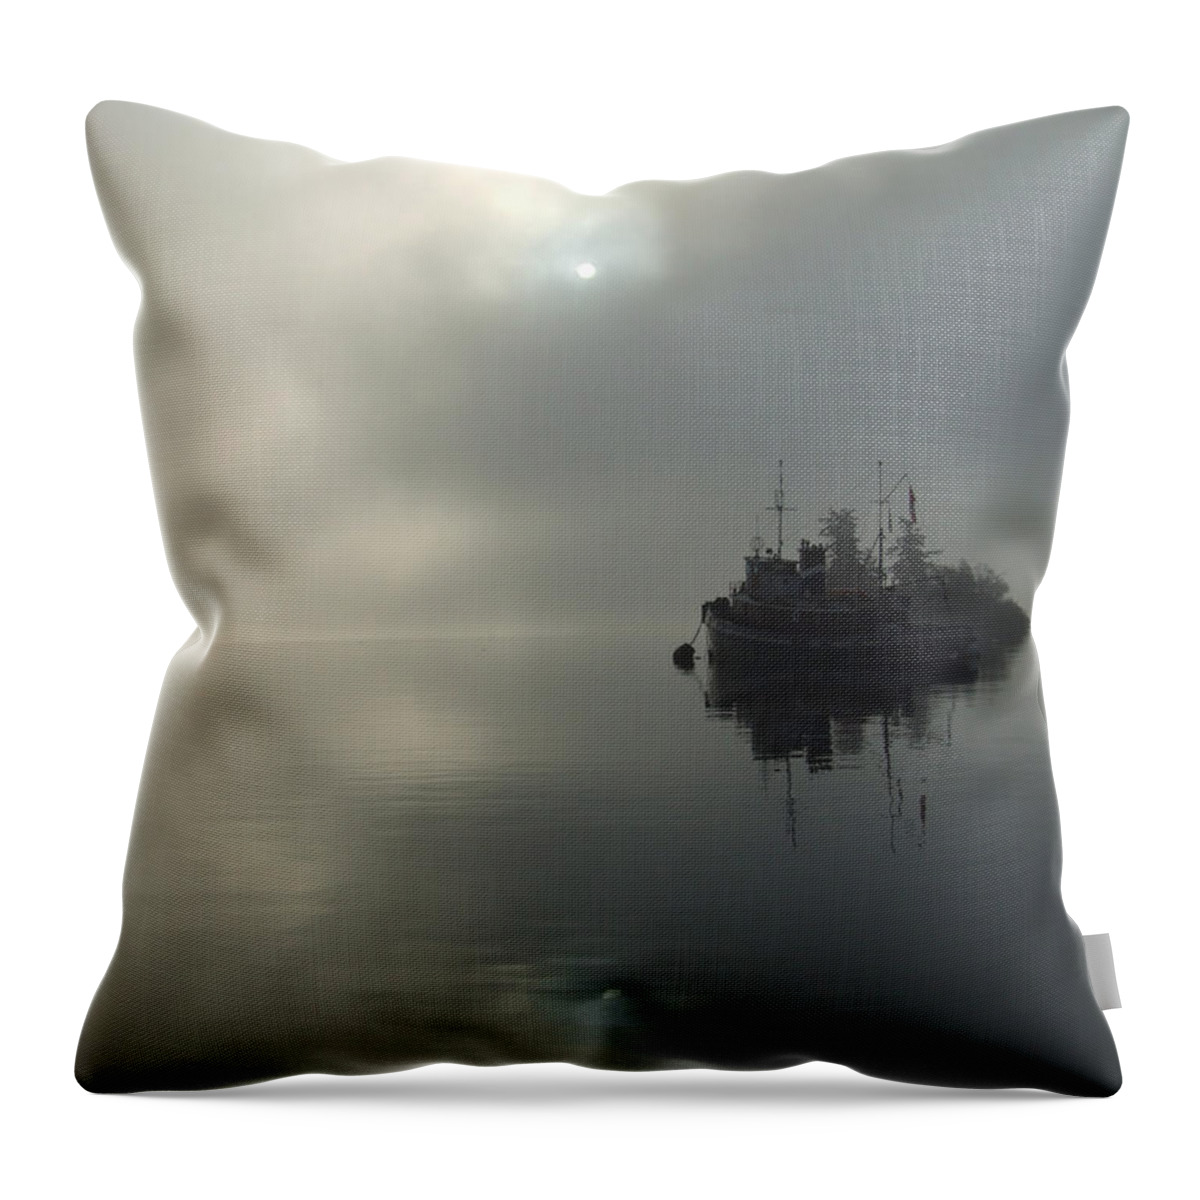 Marine Throw Pillow featuring the photograph Fog by Mark Alan Perry